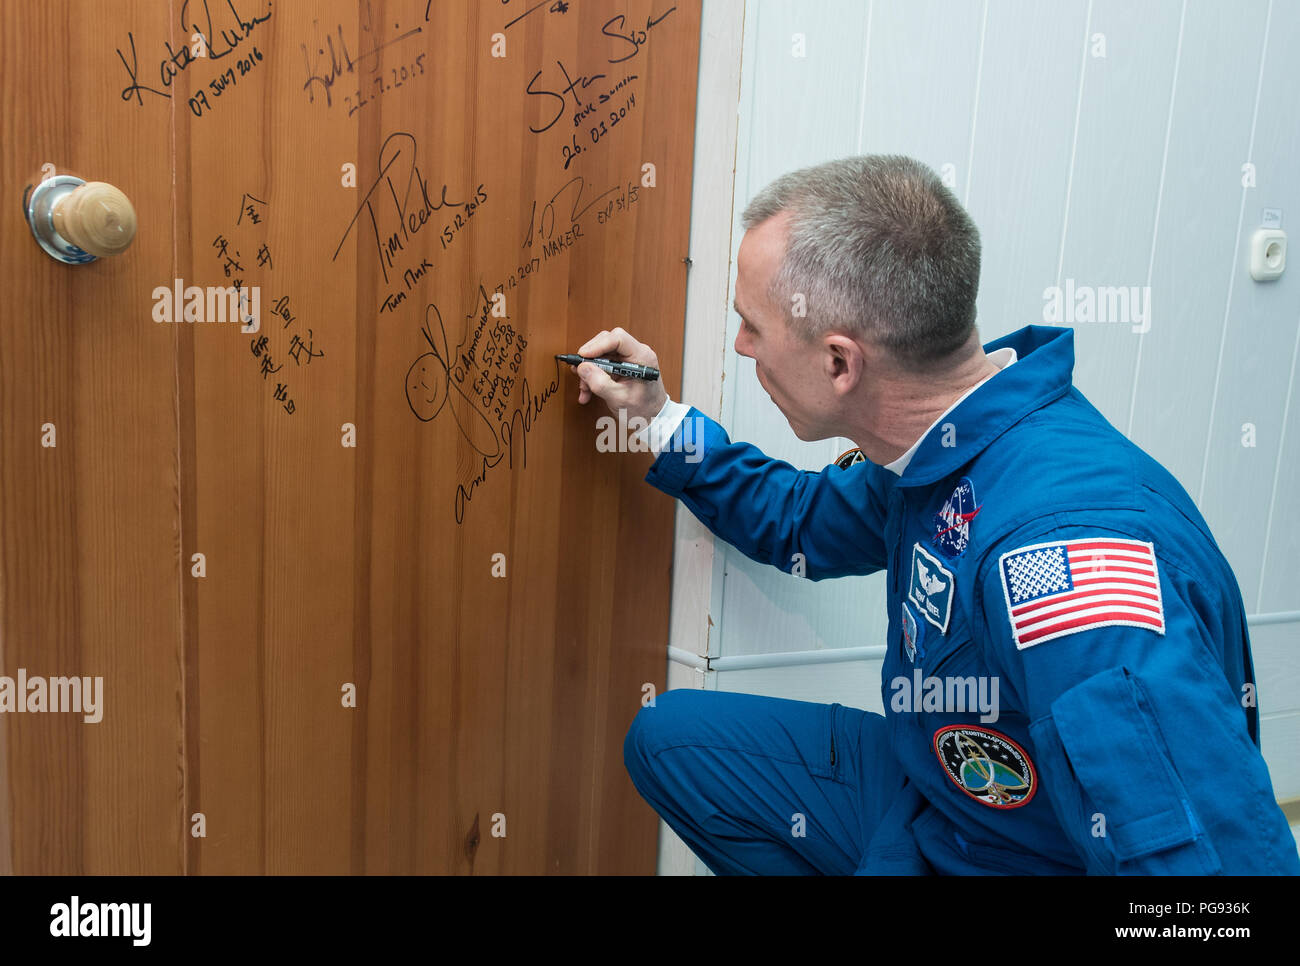 Expedition 55 flight engineer Drew Feustel of NASA performs the traditional door signing at the Cosmonaut Hotel prior to departing the hotel for launch on a Soyuz rocket with fellow crewmates Oleg Artemyev of Roscosmos and Ricky Arnold of NASA, Wednesday, March 21, 2018 in Baikonur, Kazakhstan.  Feustel, Artemyev, and Arnold will launch in their Soyuz MS-08 spacecraft to the International Space Station to being a five month mission. Stock Photo